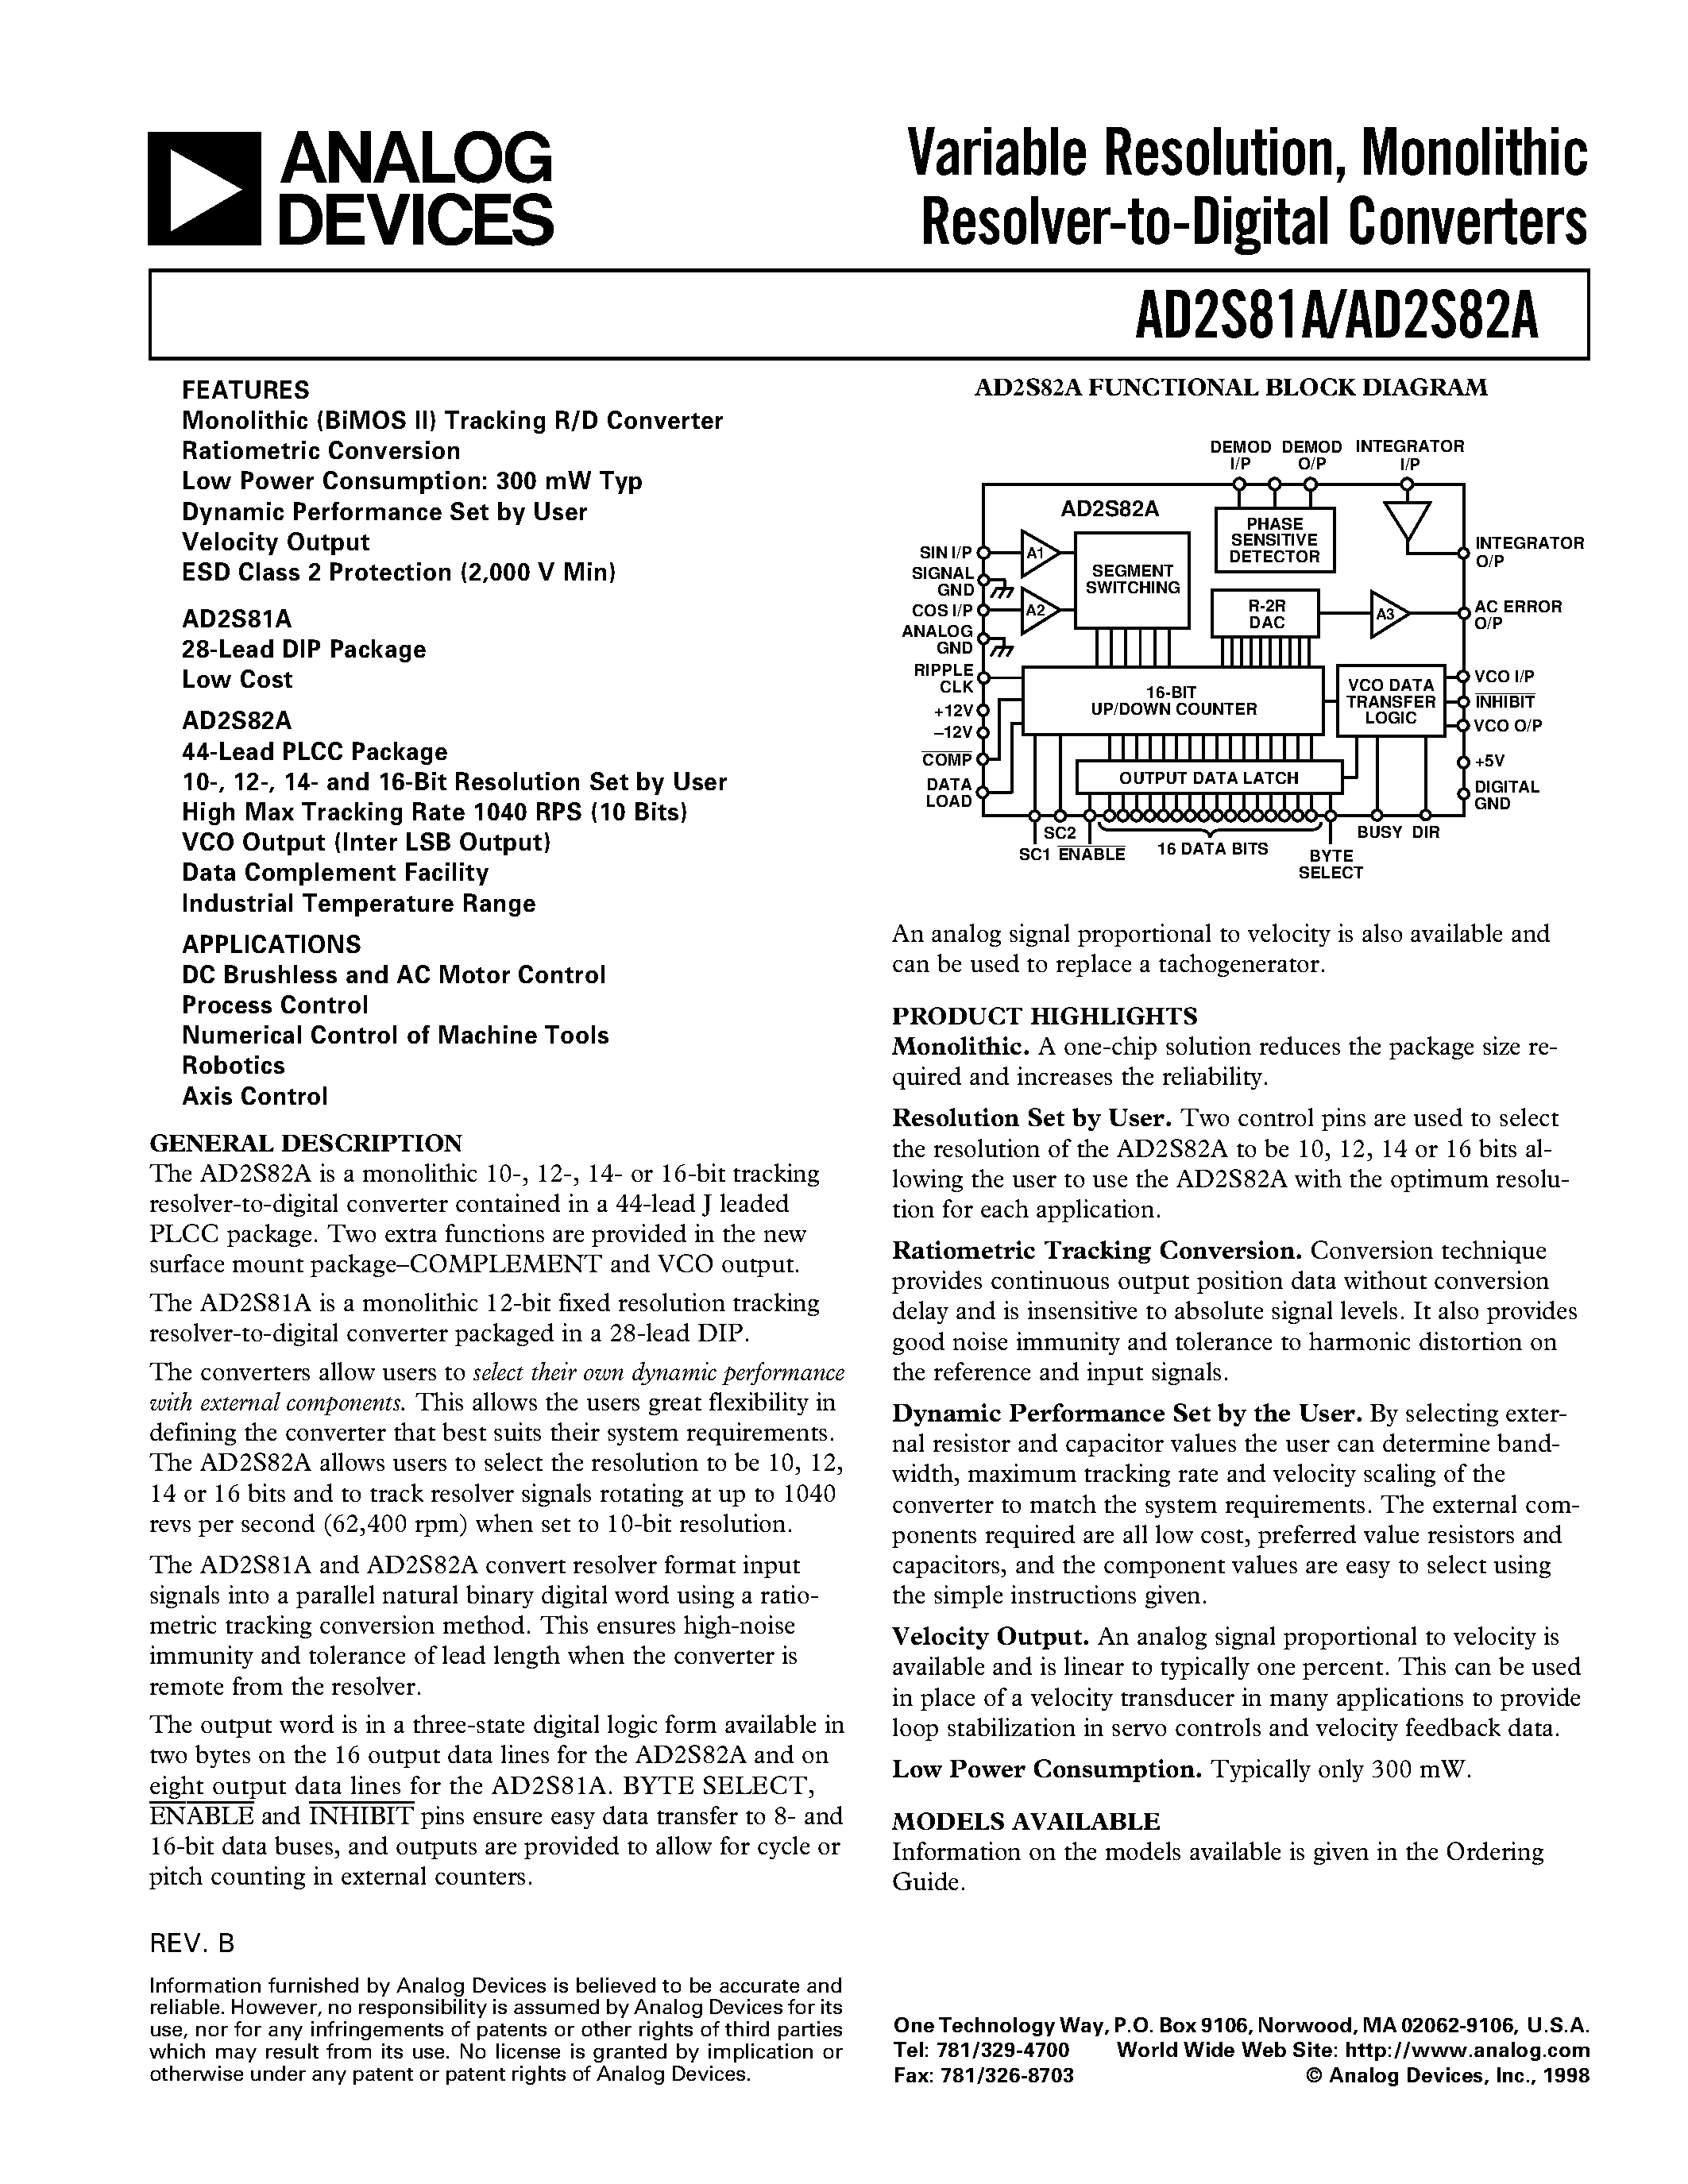 Datasheet AD2S81A - Variable Resolution/ Monolithic Resolver-to-Digital Converters page 1